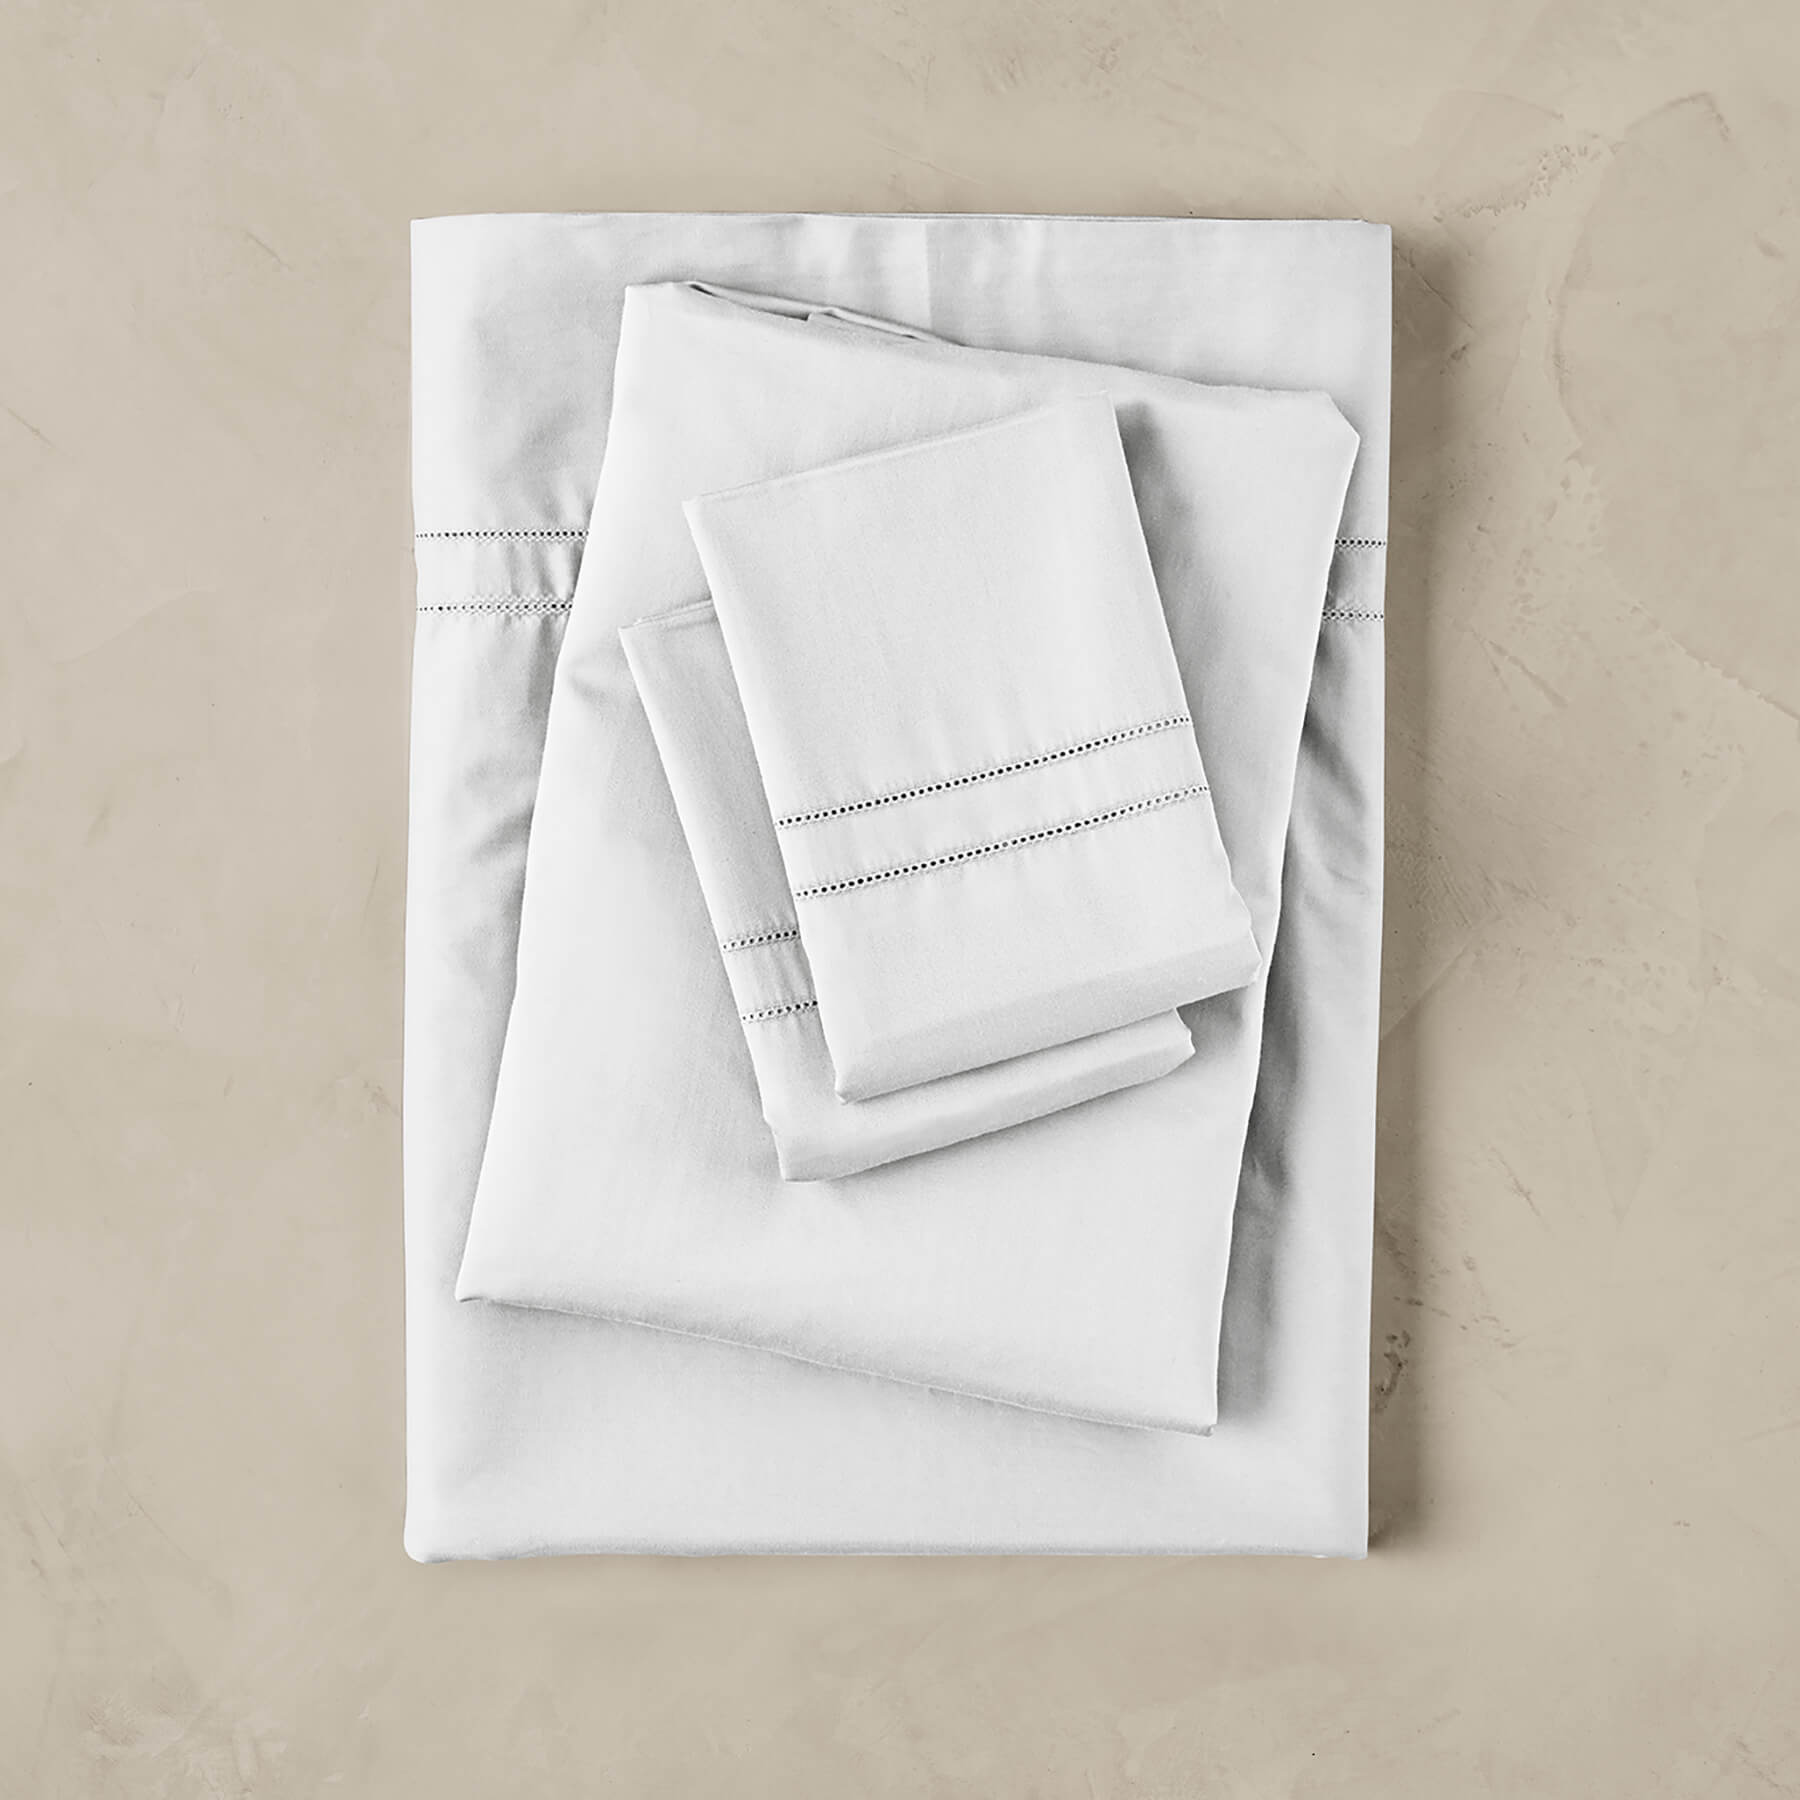 Kings & Queens Egyptian Cotton Classic Hemstitch Sheet Set in White Bedding Set